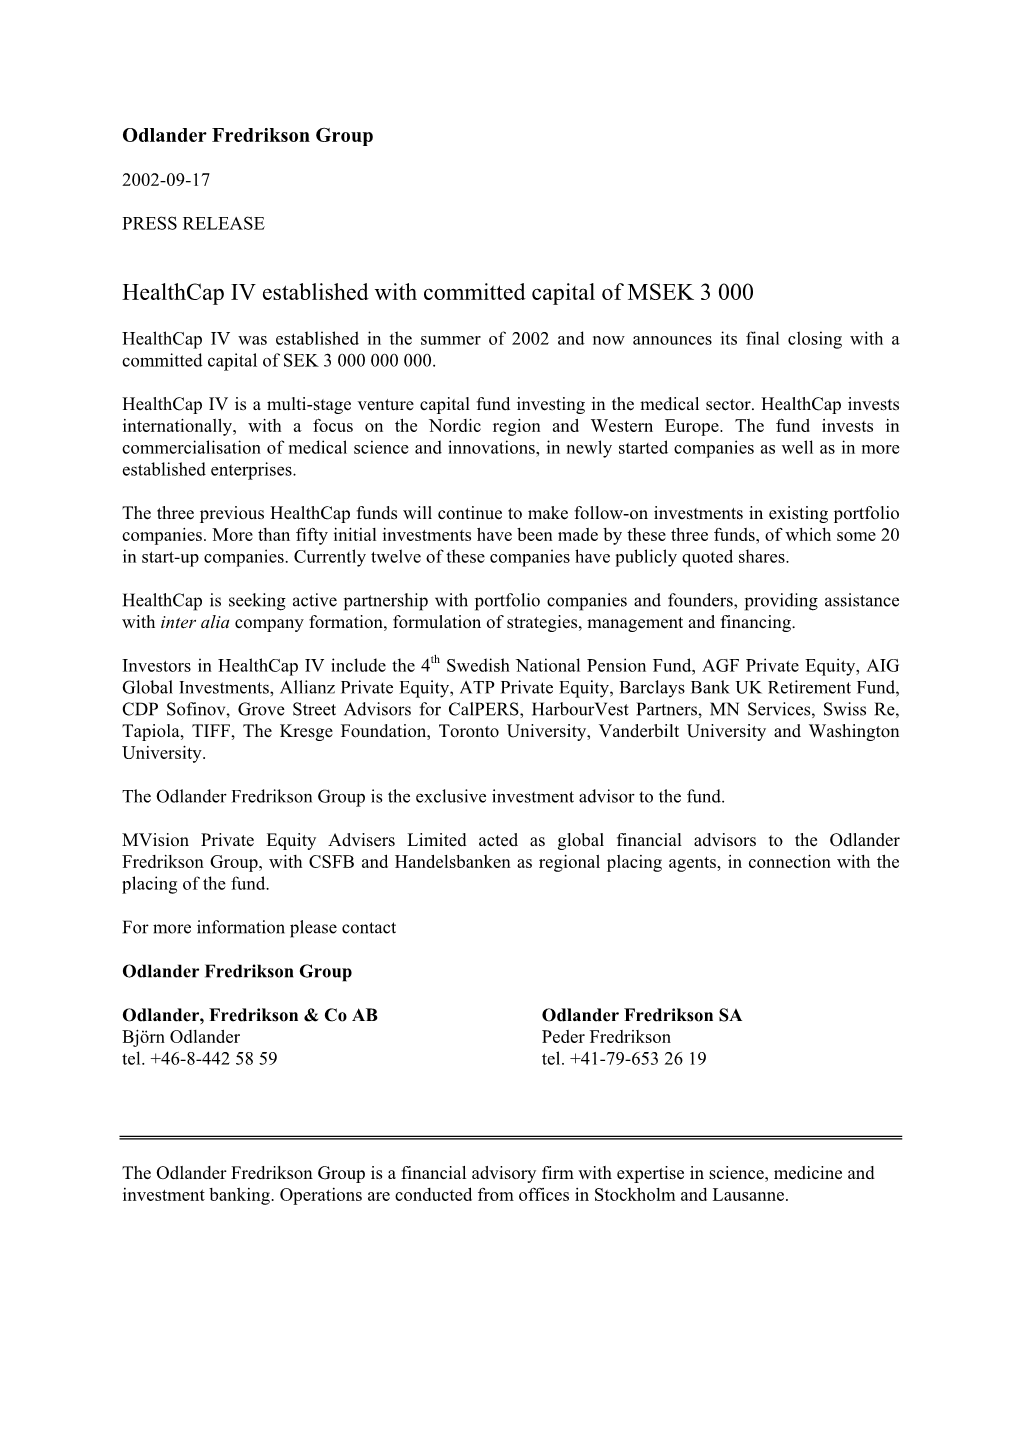 Healthcap IV Established with Committed Capital of MSEK 3 000